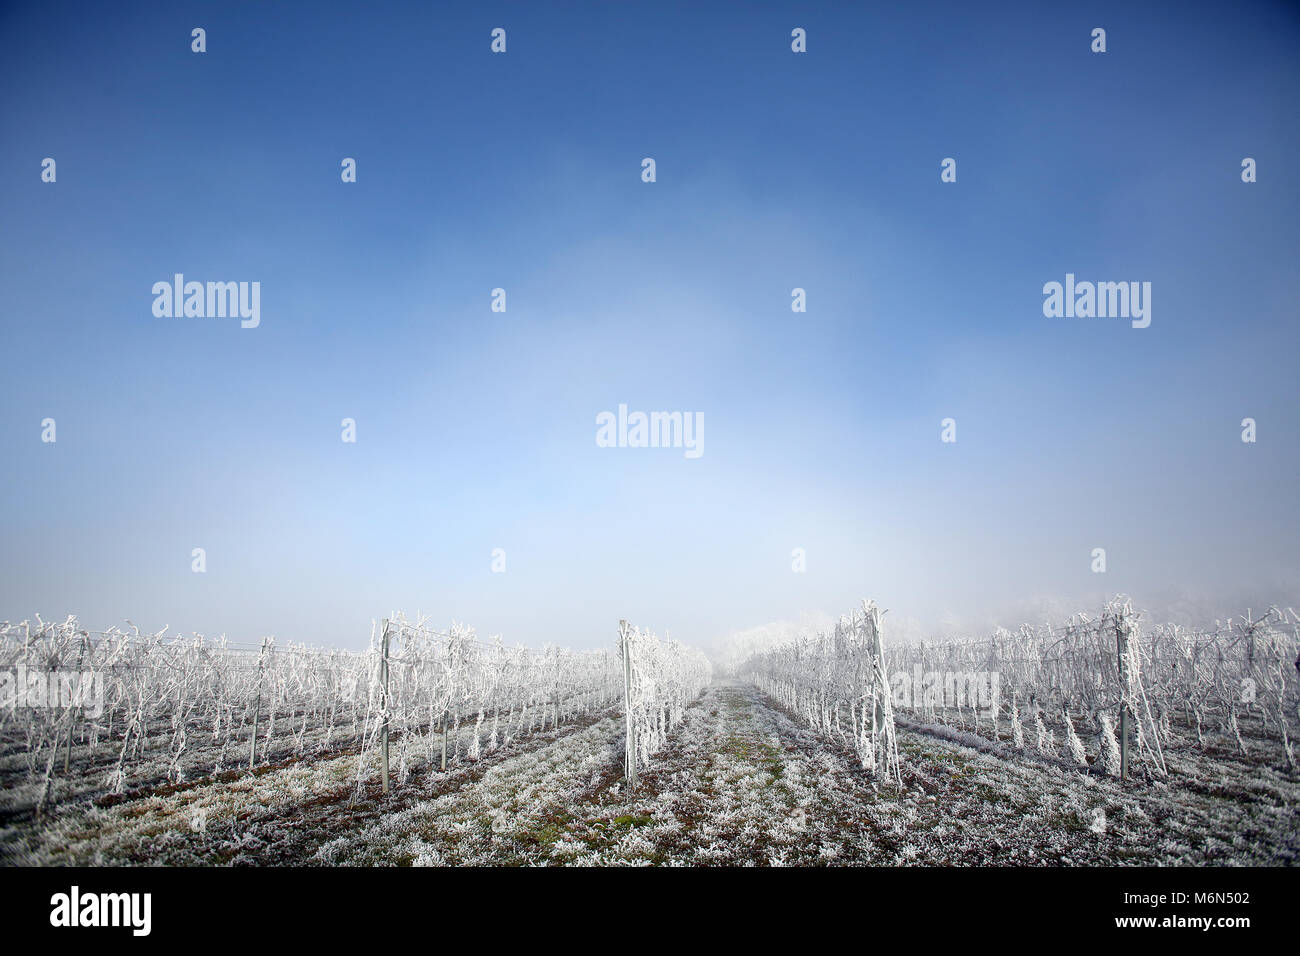 Vineyard in winter. Frozen landscape at sunny and foggy day. Stock Photo